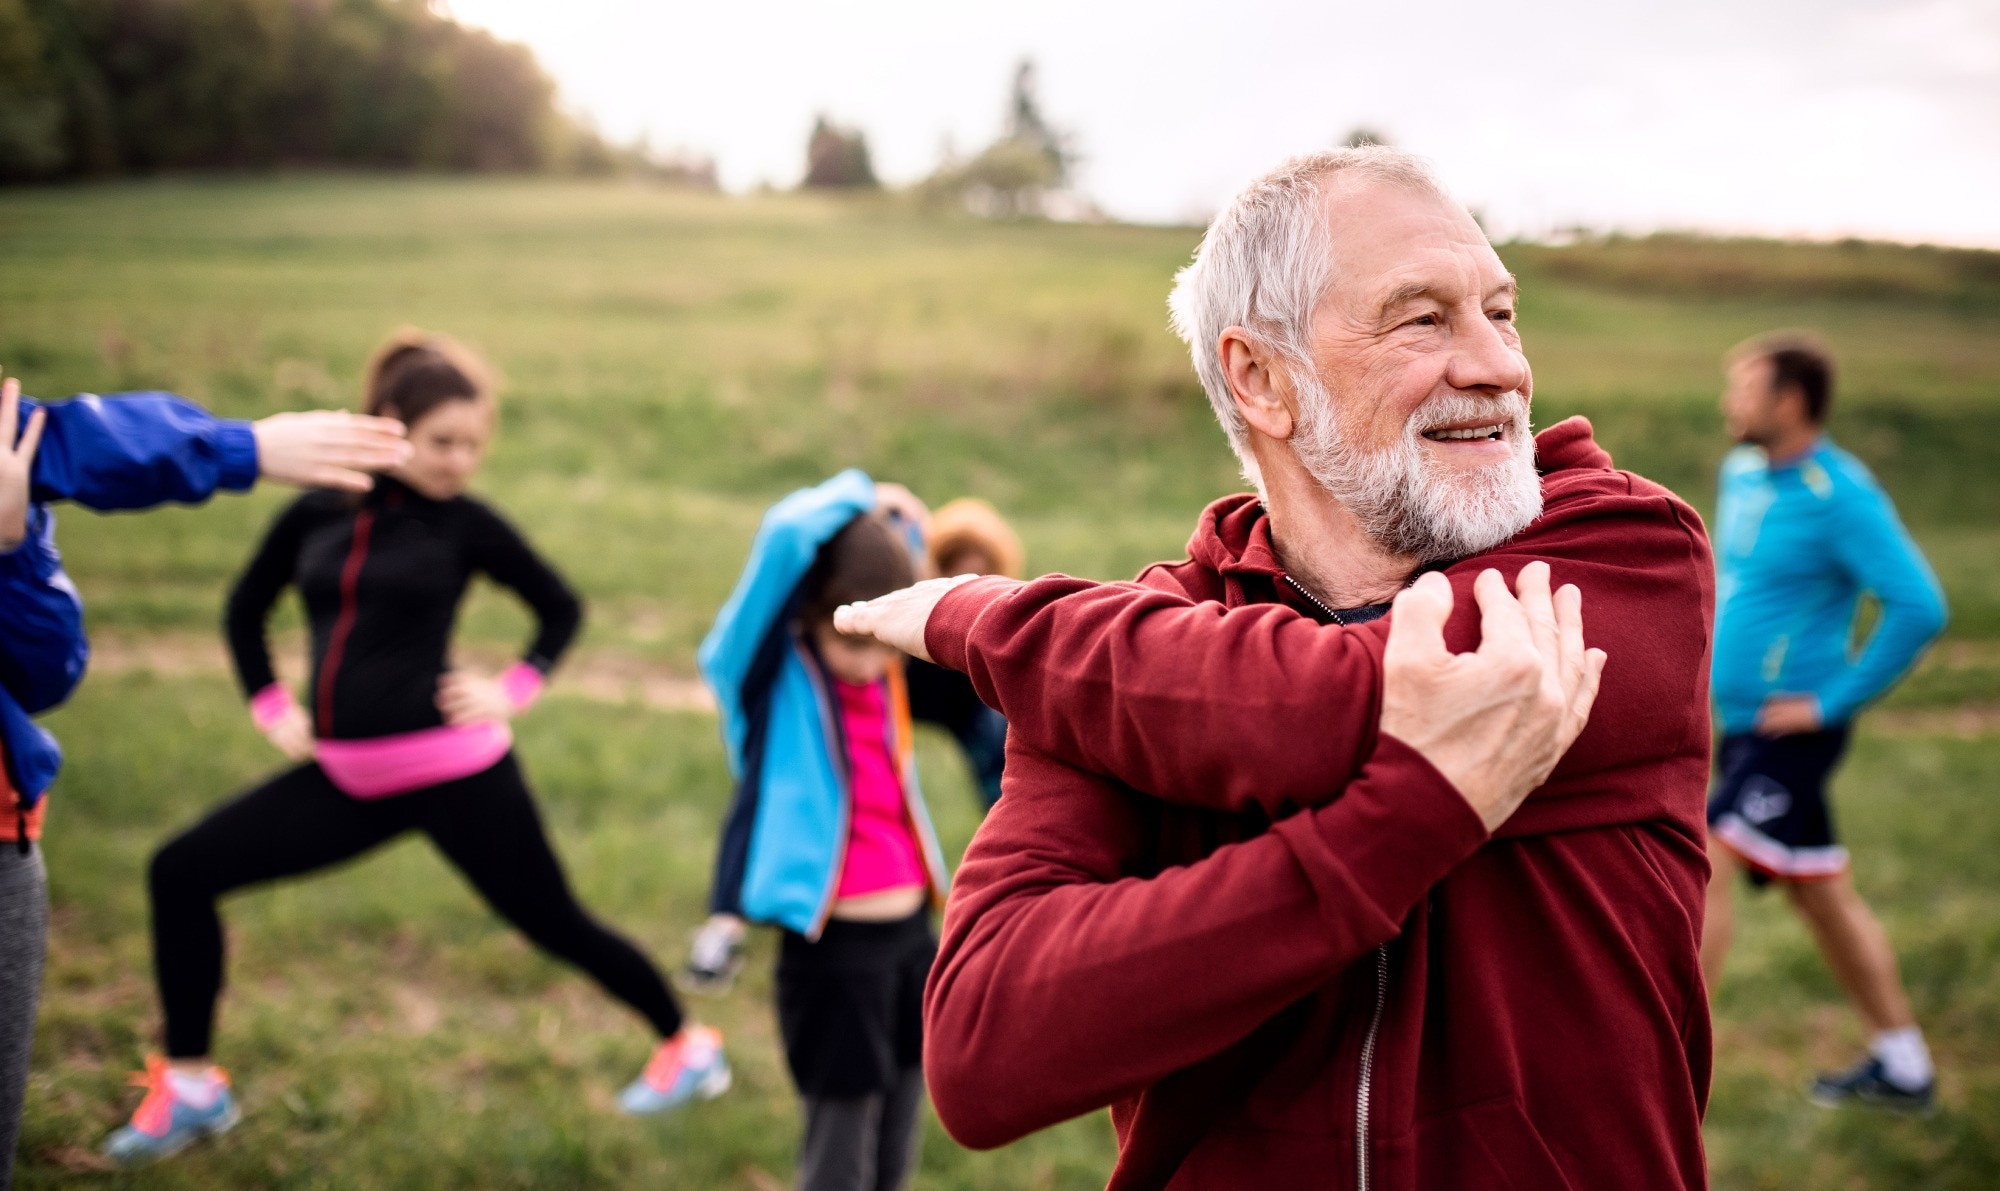 Study demonstrates that age and exercise increases aerosol particle emission